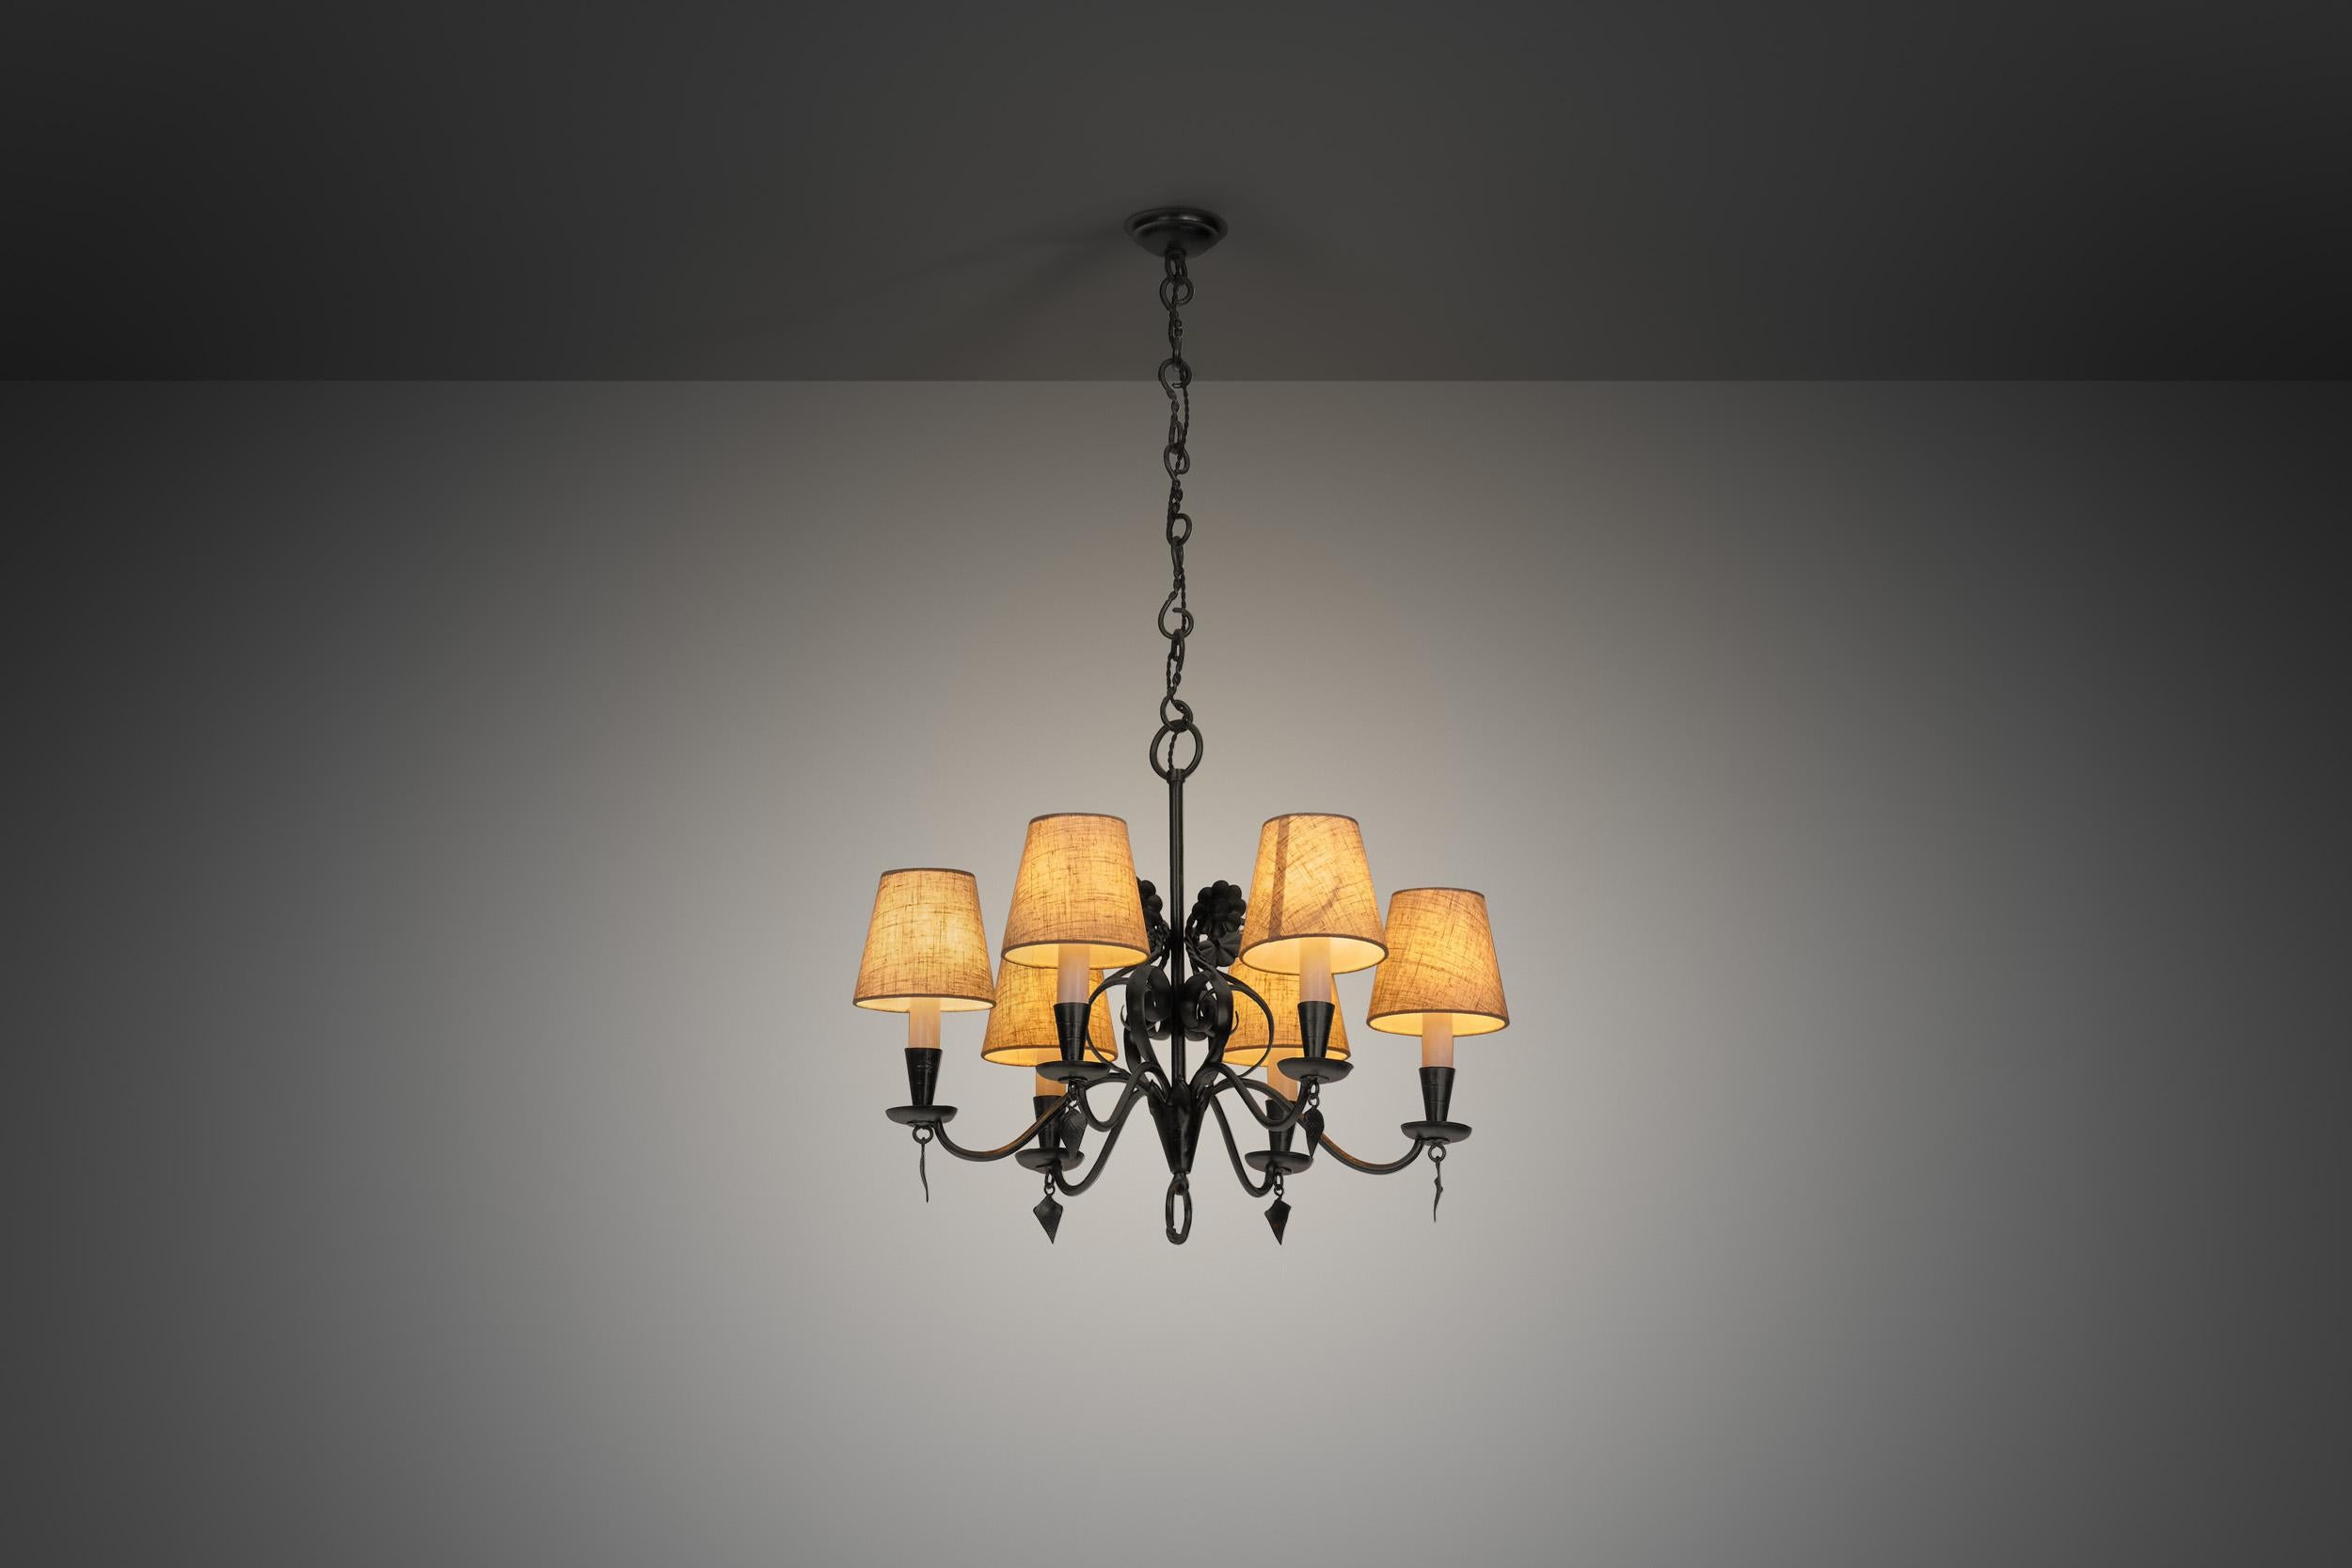 Mid-20th Century Paavo Tynell “R4/1704” Wrought Iron Chandelier for Taito, Finland 1930s For Sale